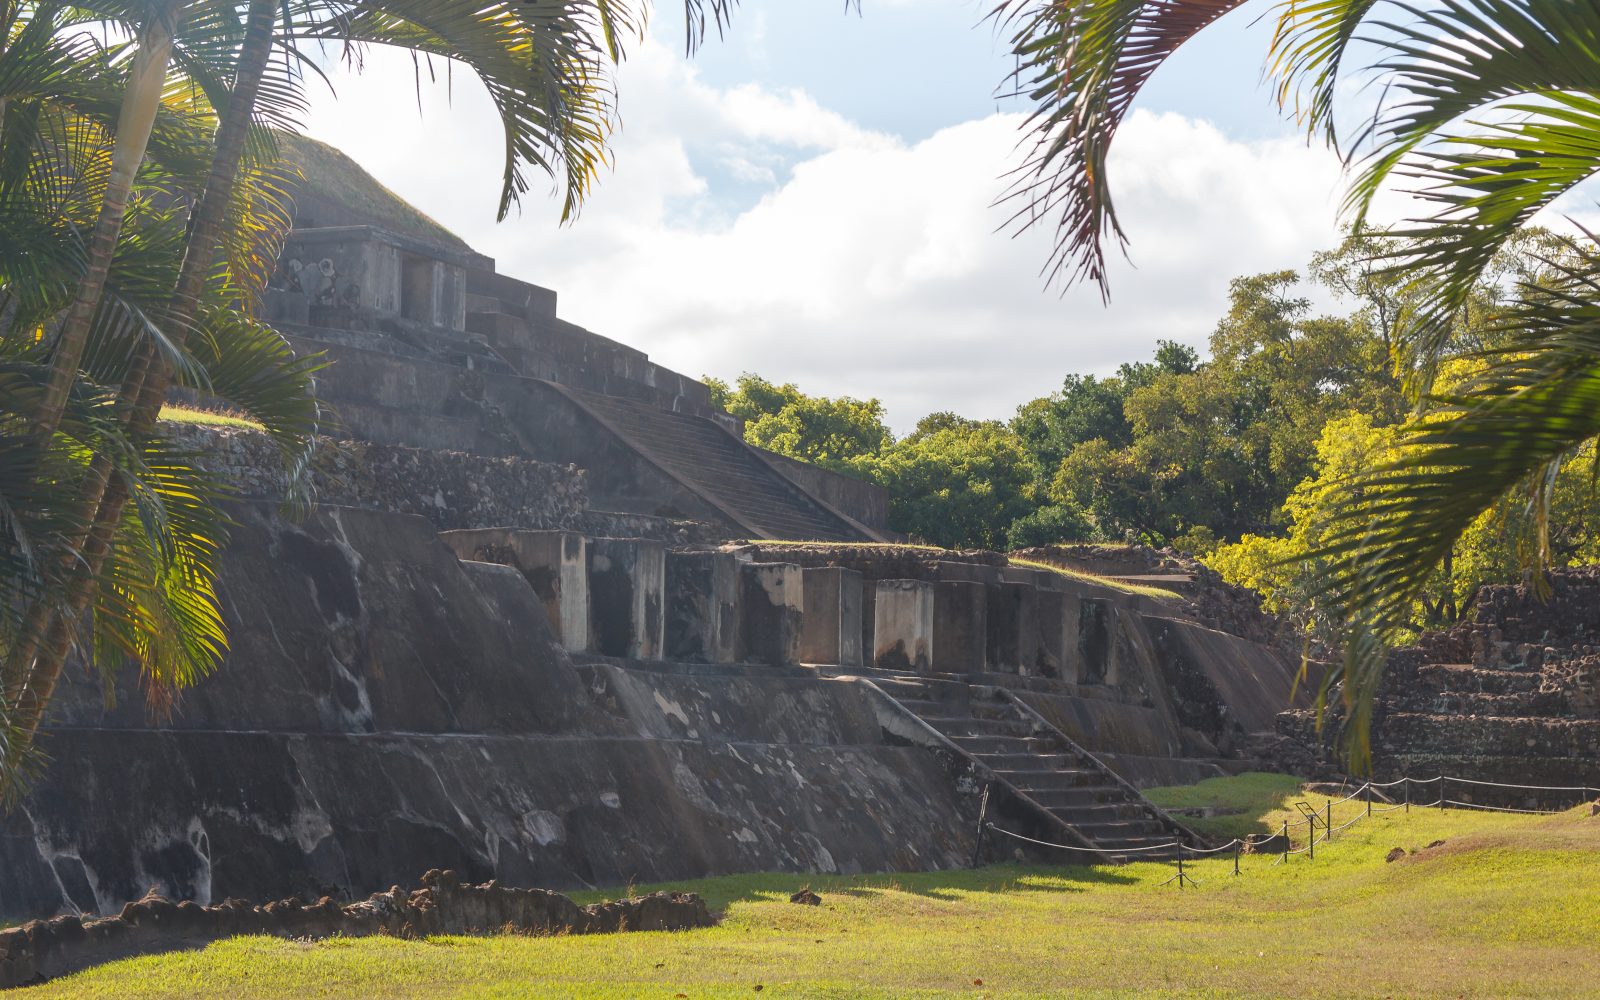 Mayan archaeological sites